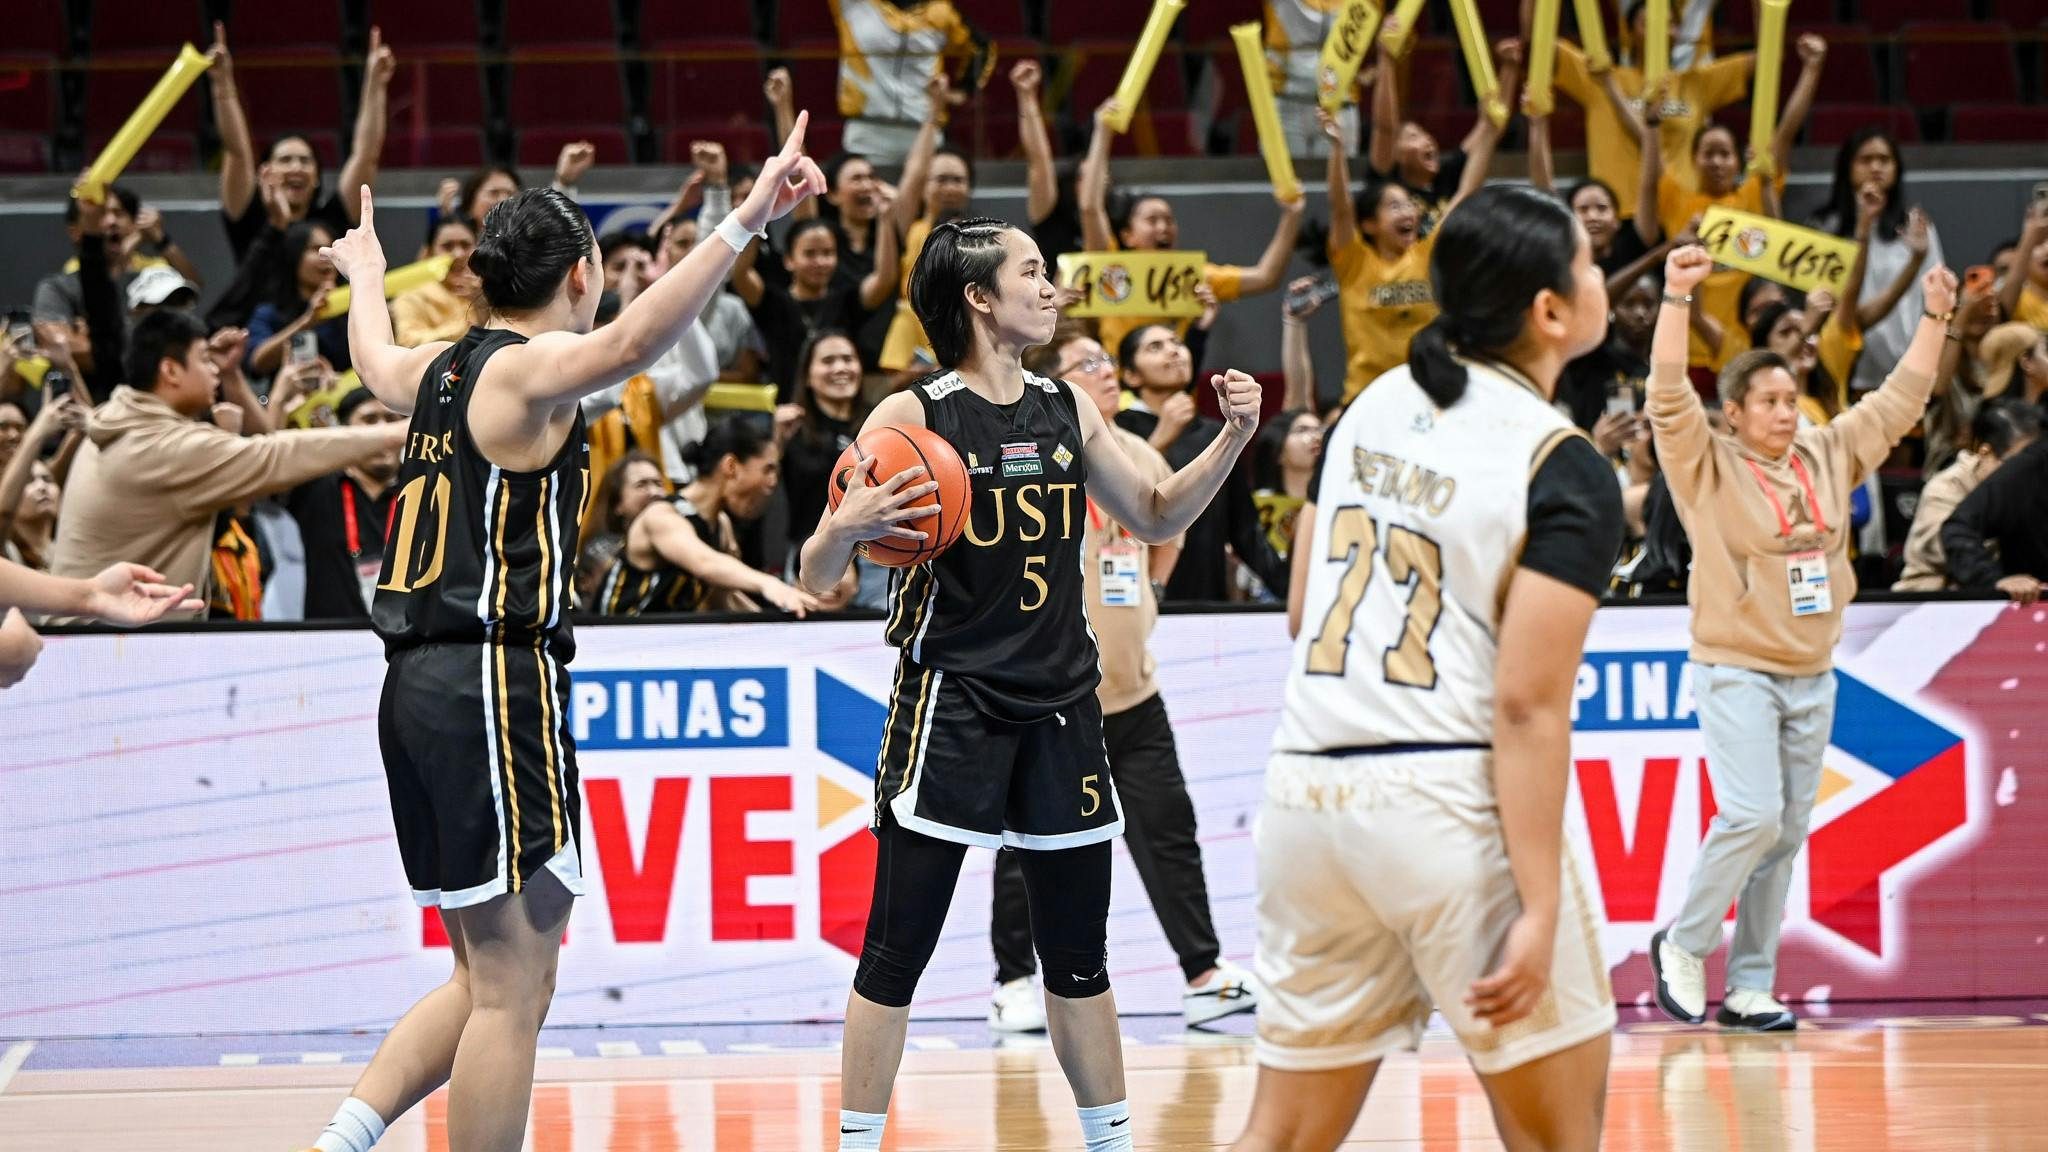 Extra feats for UST after upsetting defending champion NU in Game 1 of women